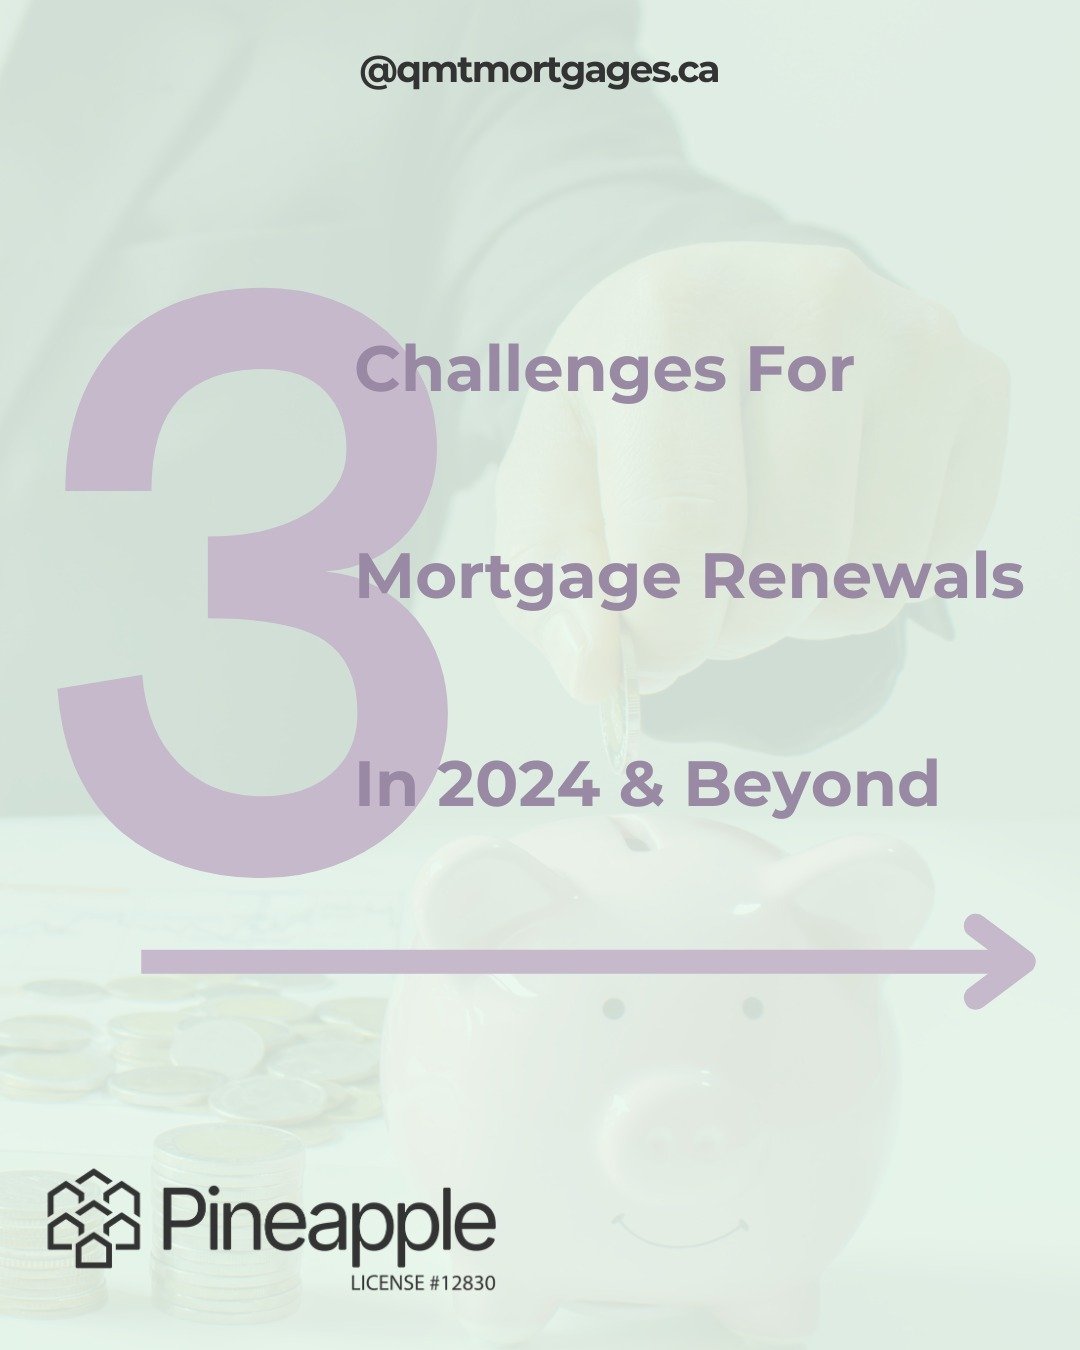 🚨 Homeowners, listen up! 🚨

Even though interest rates have been climbing for over 2 years, the real impact might hit when it's time to renew your mortgage. If you locked in those ultra-low rates in 2020 or 2021, brace yourselves for potential big 